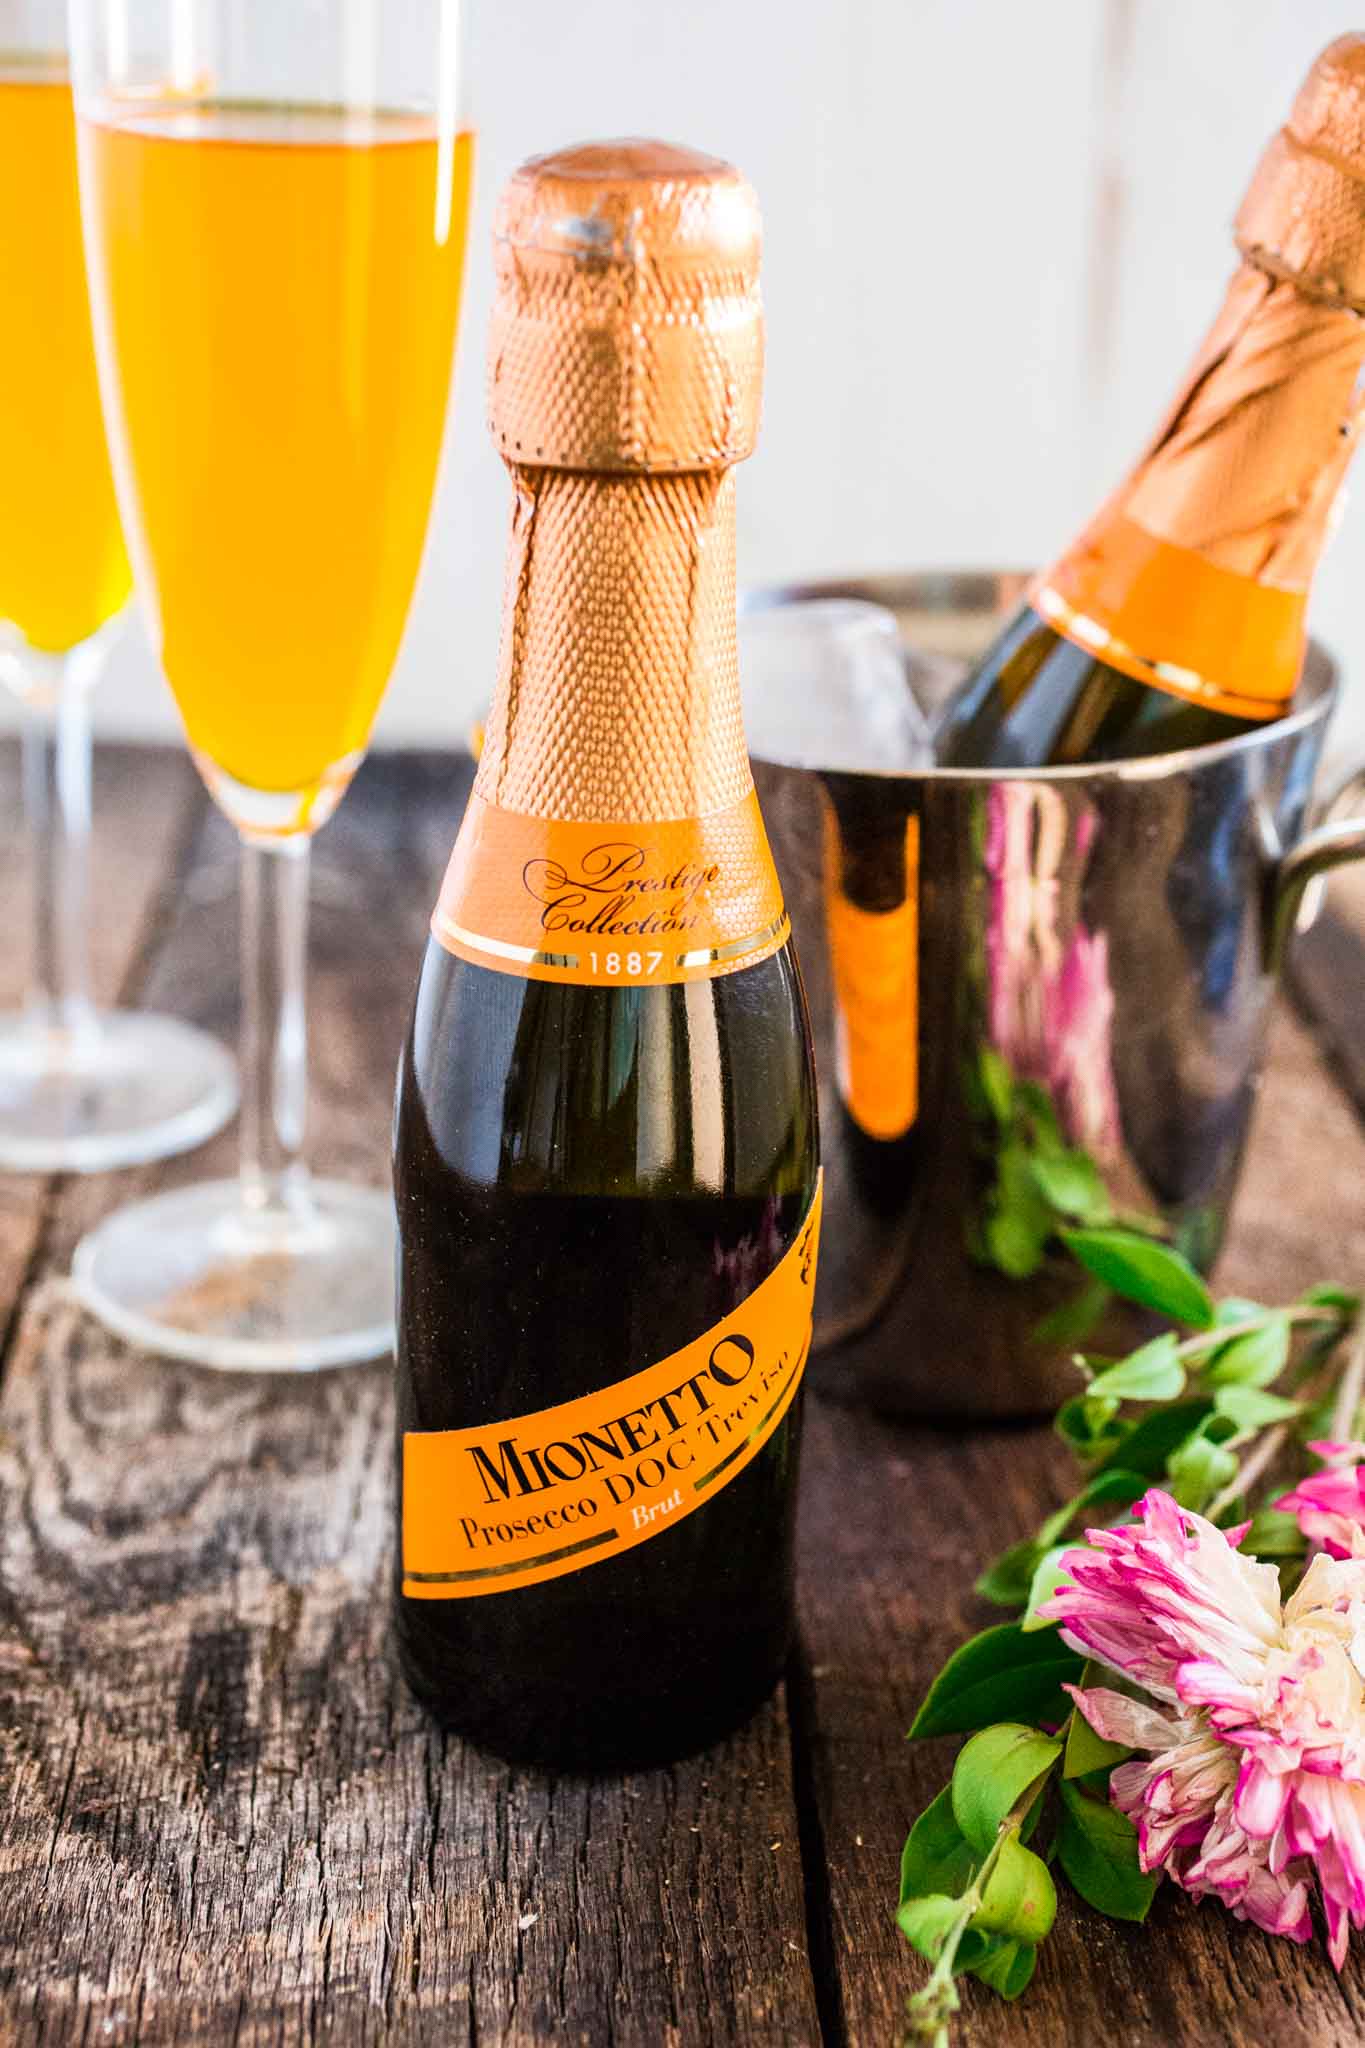 Passion Fruit Prosecco Mimosa | www.oliviascuisine.com | A refreshing and easy cocktail, made with only 2 ingredients: Passion Fruit juice and Mionetto Prosecco! MyMionetto (Msg 4 21+) AD